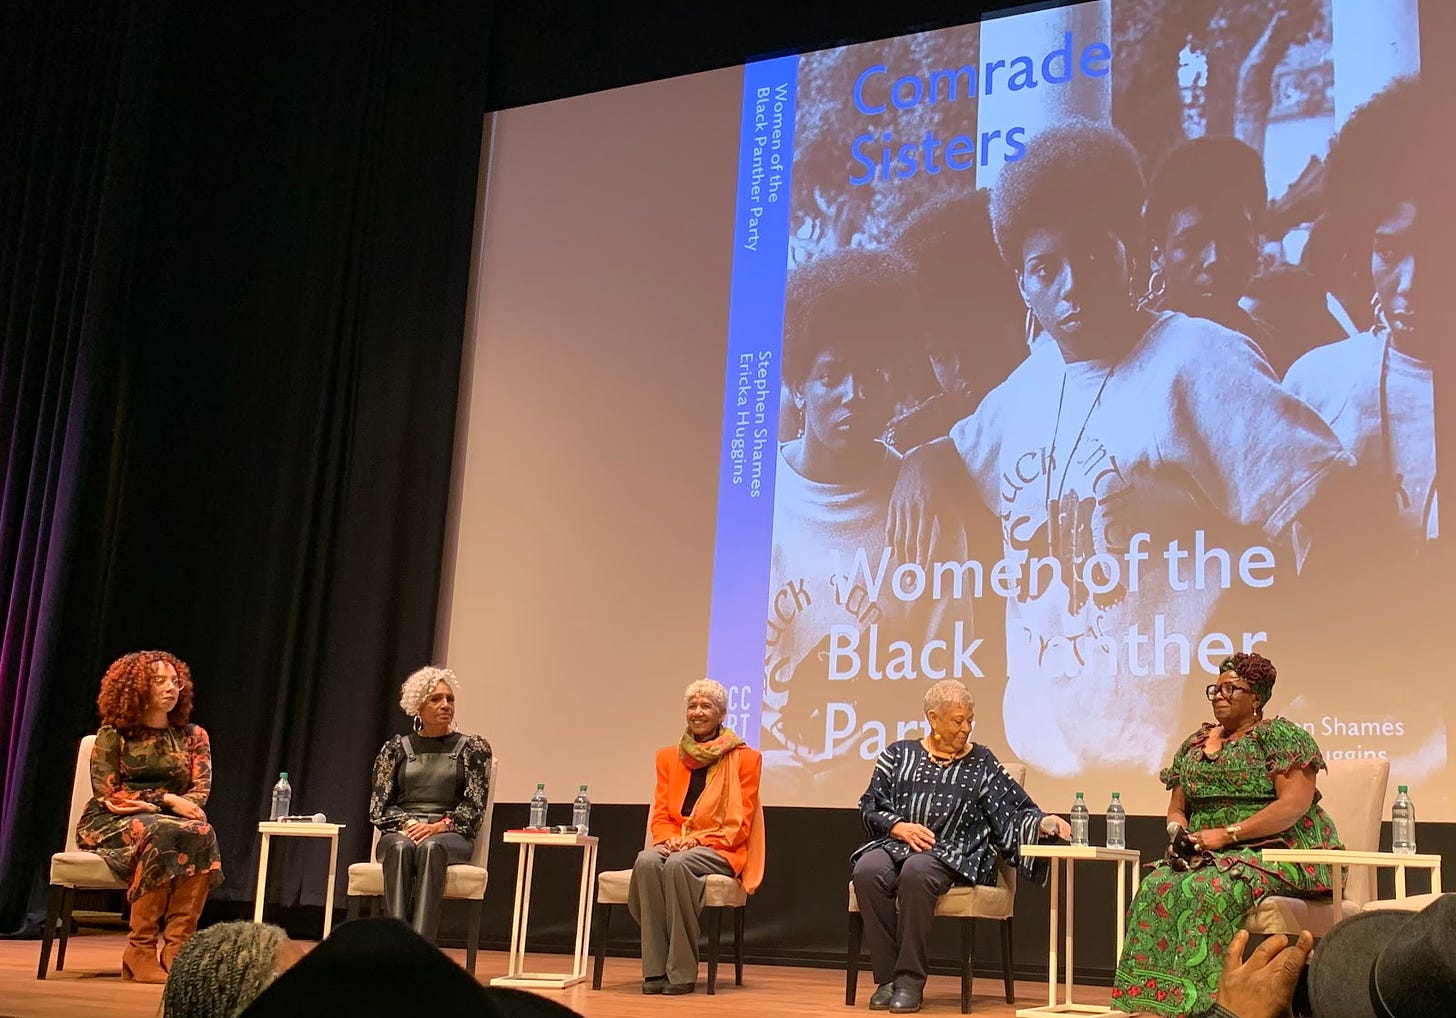 Five Black women seated on a stage. Behind them is a large screen with a black and white photo of Black people with afros wearing Black Panther t-shirts. Words on the screen read, “Comrade Sisters” and “Women of the Black Panther Party.”